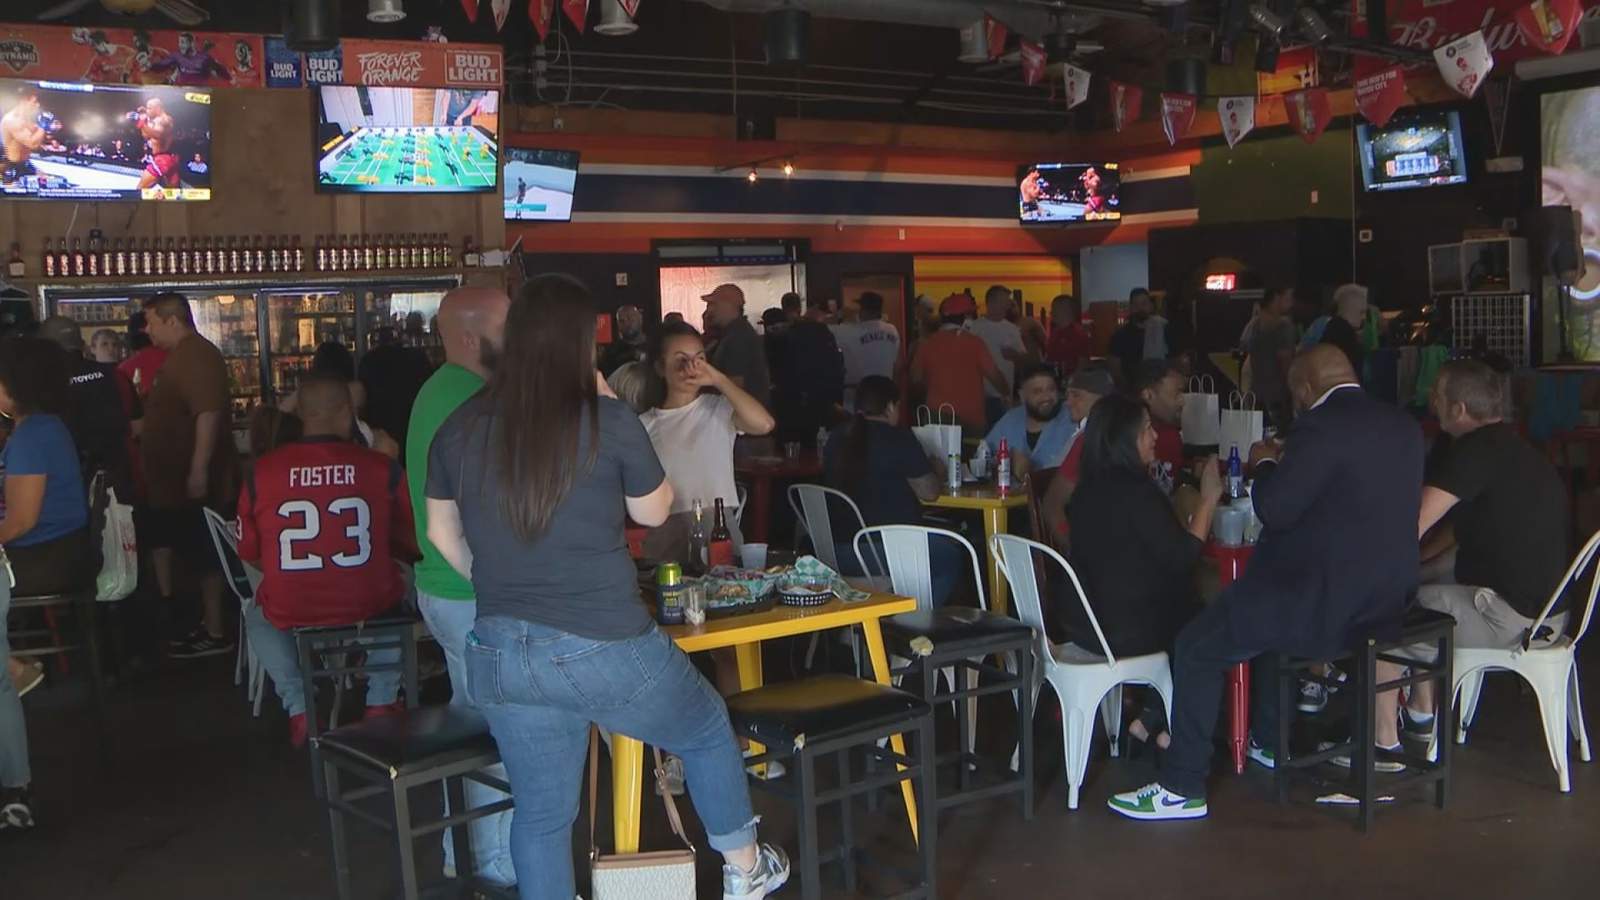 Bar customers a little too close for comfort for county, city leaders in Houston